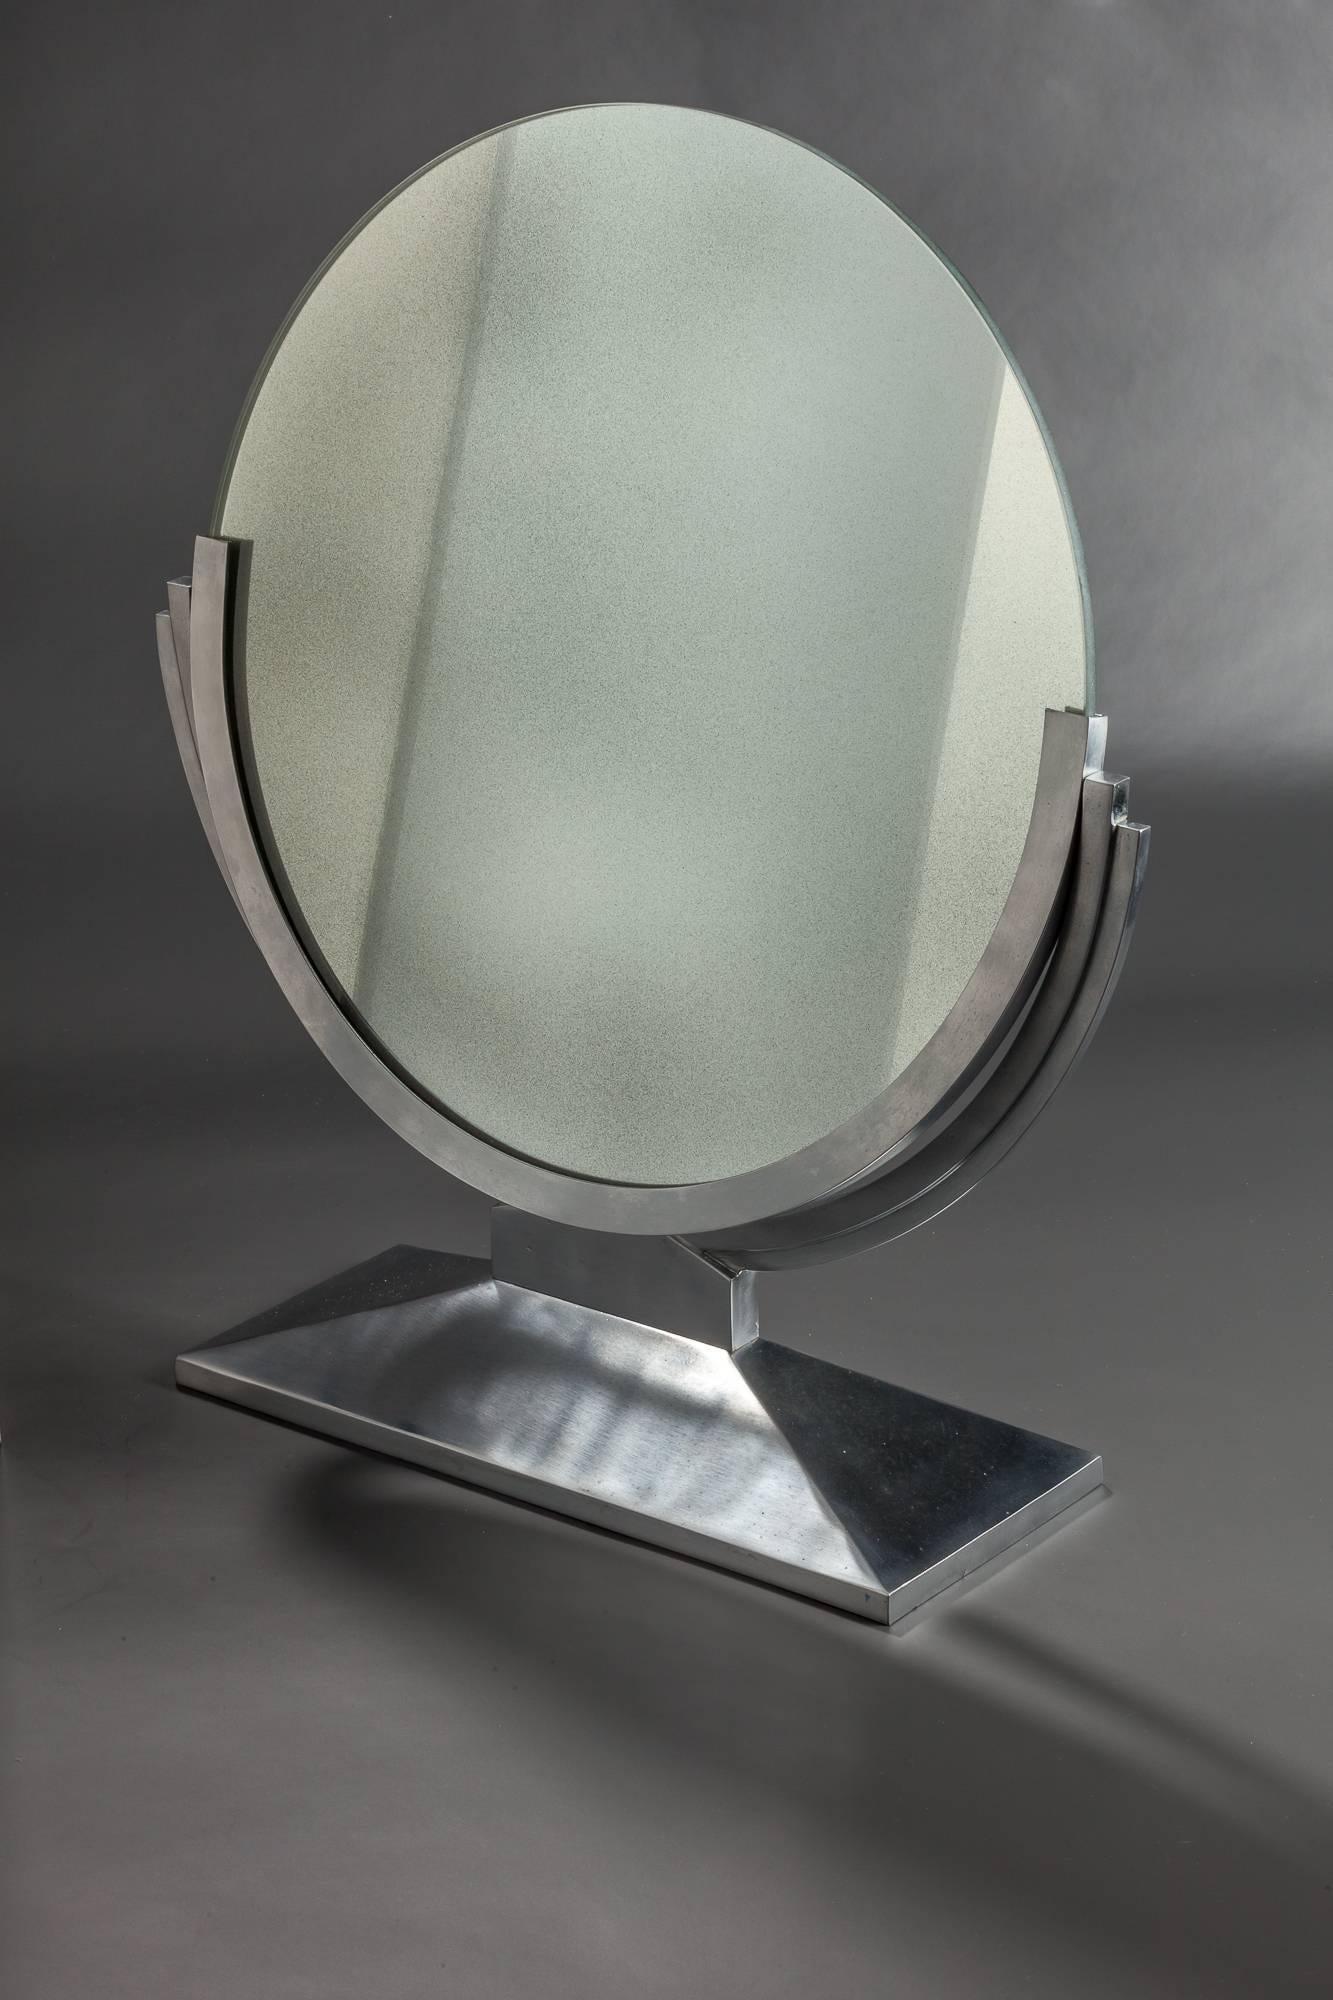 Exceptional and rare Art Deco table mirror attributed to Maison Dominique (André Domin et Marcel Genevriere).